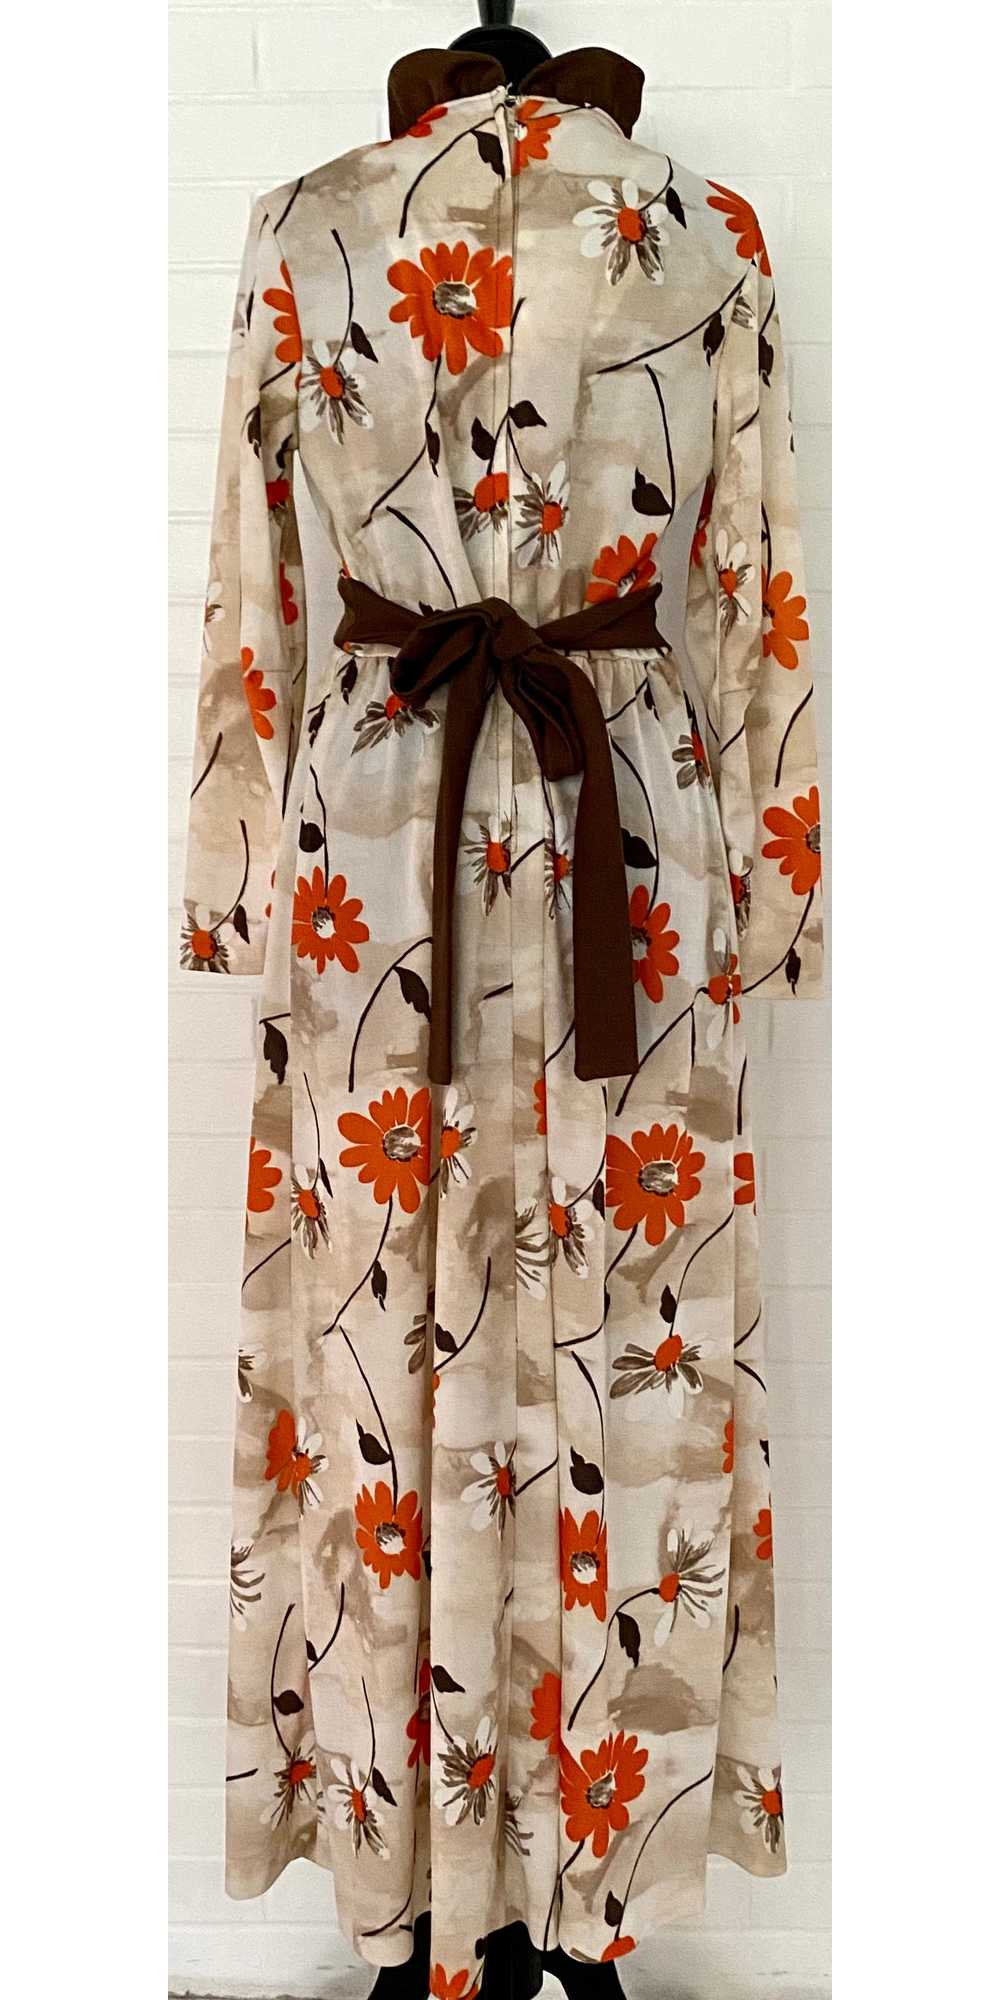 Late 60s/ Early 70s Flowered Maxi Dress - image 5